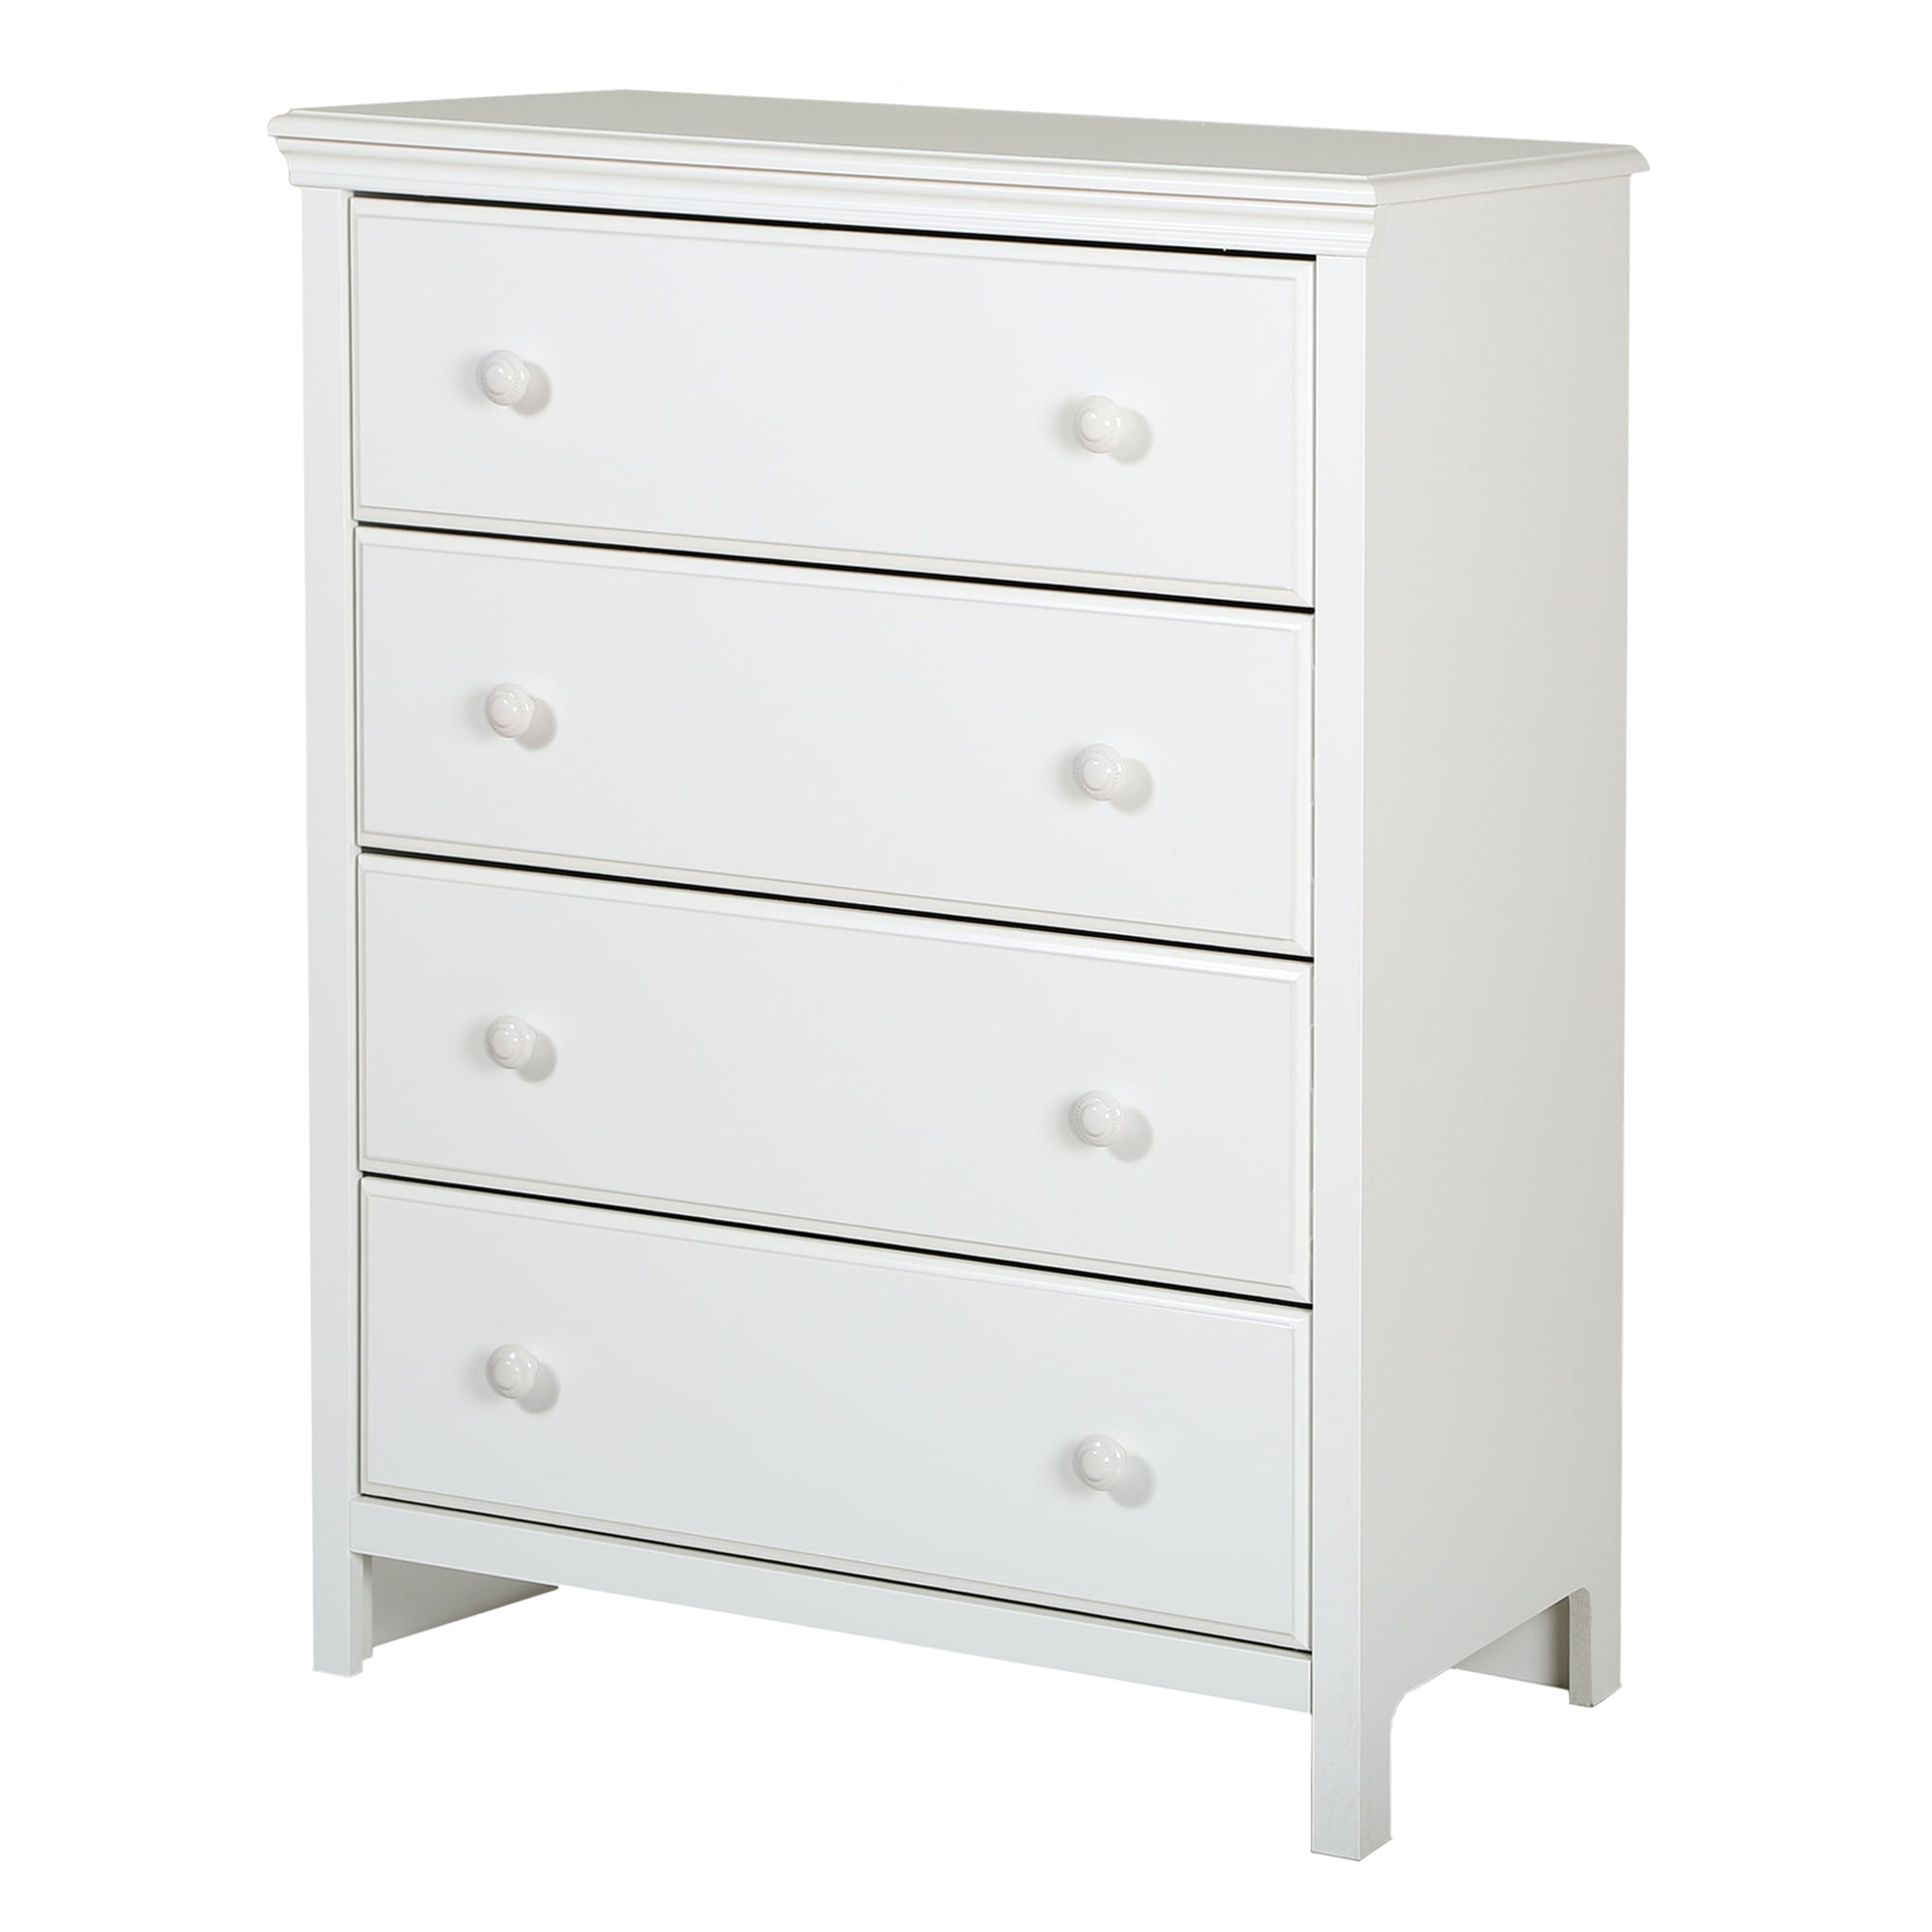 South Shore Cotton Candy 4 Drawer Chest White Walmart Com